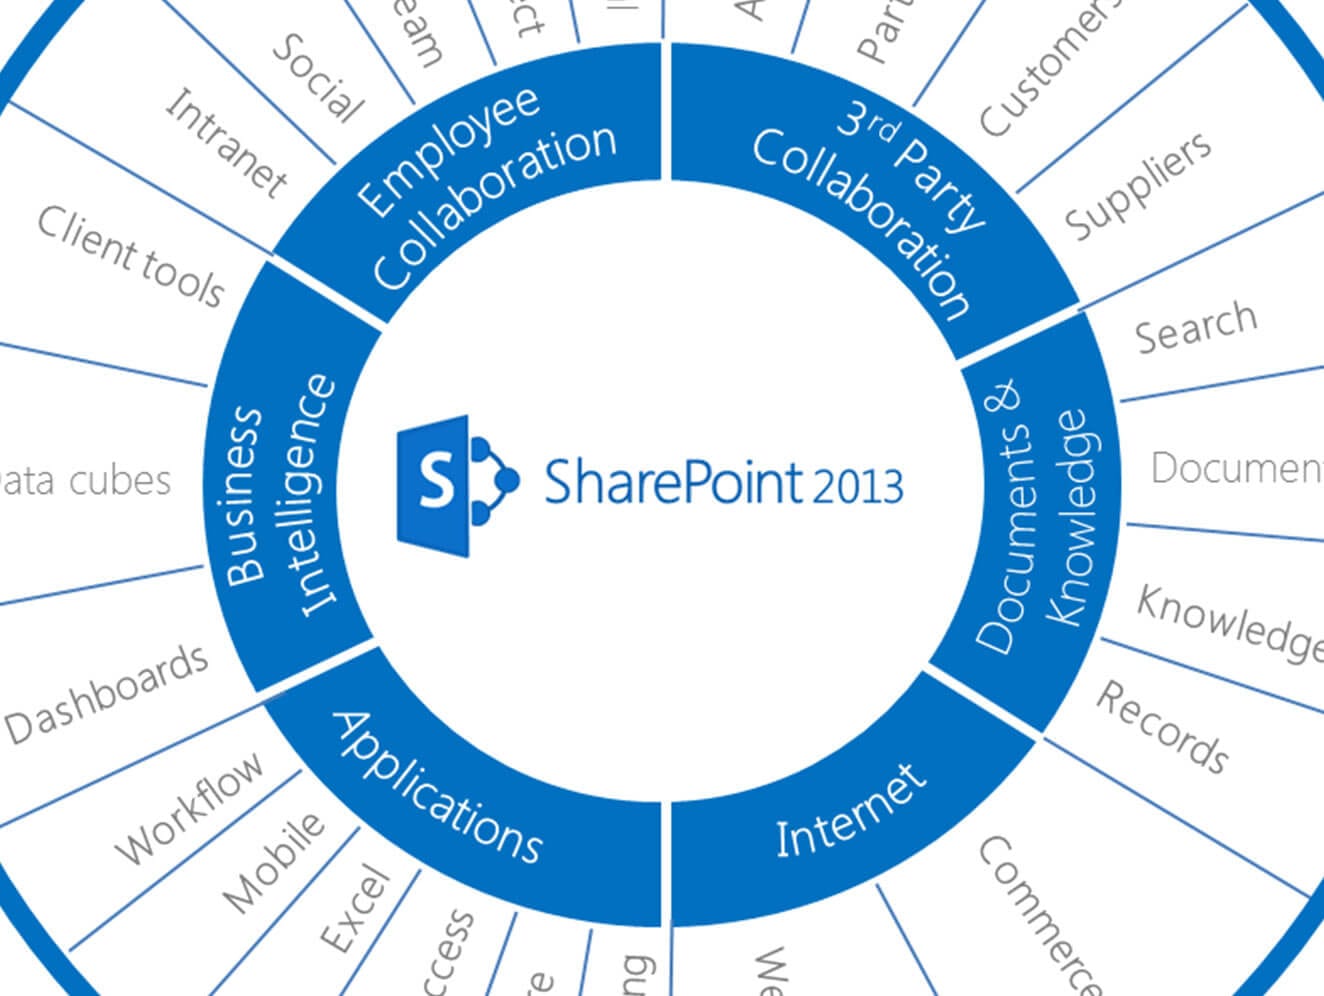 What Are The Features Of Sharepoint?